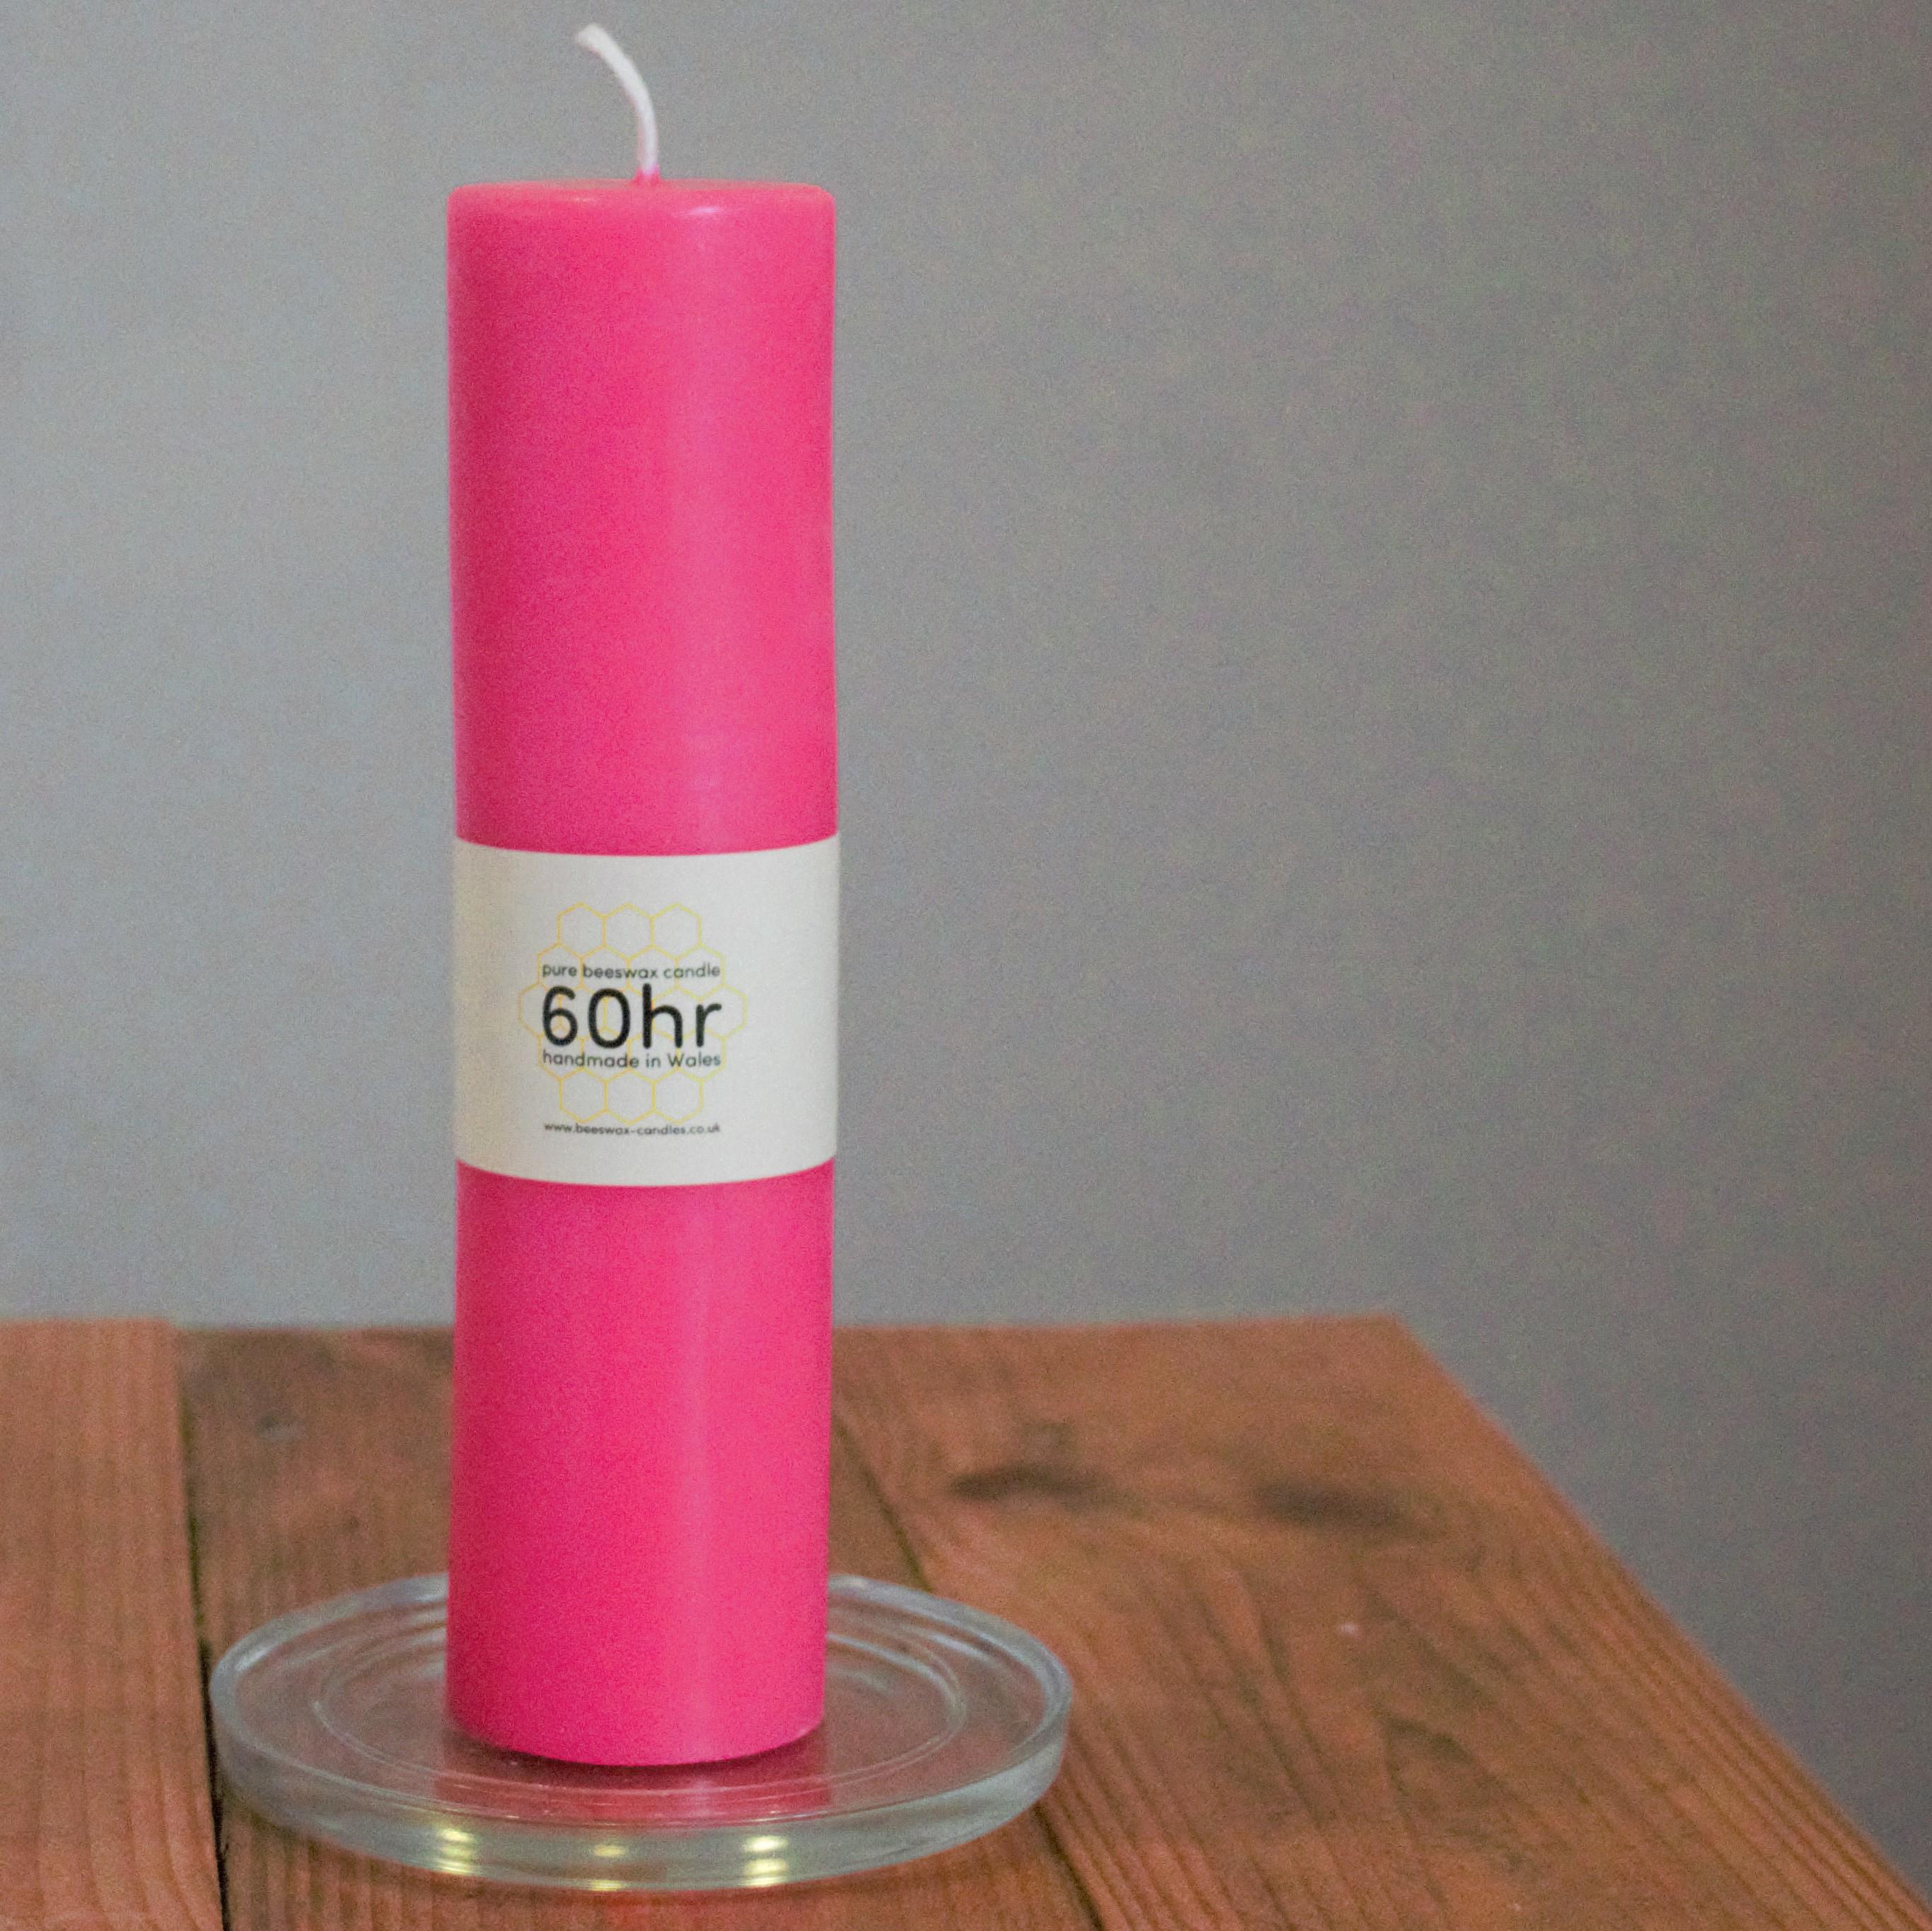 Hot pink 60hr pure beeswax pillar candle